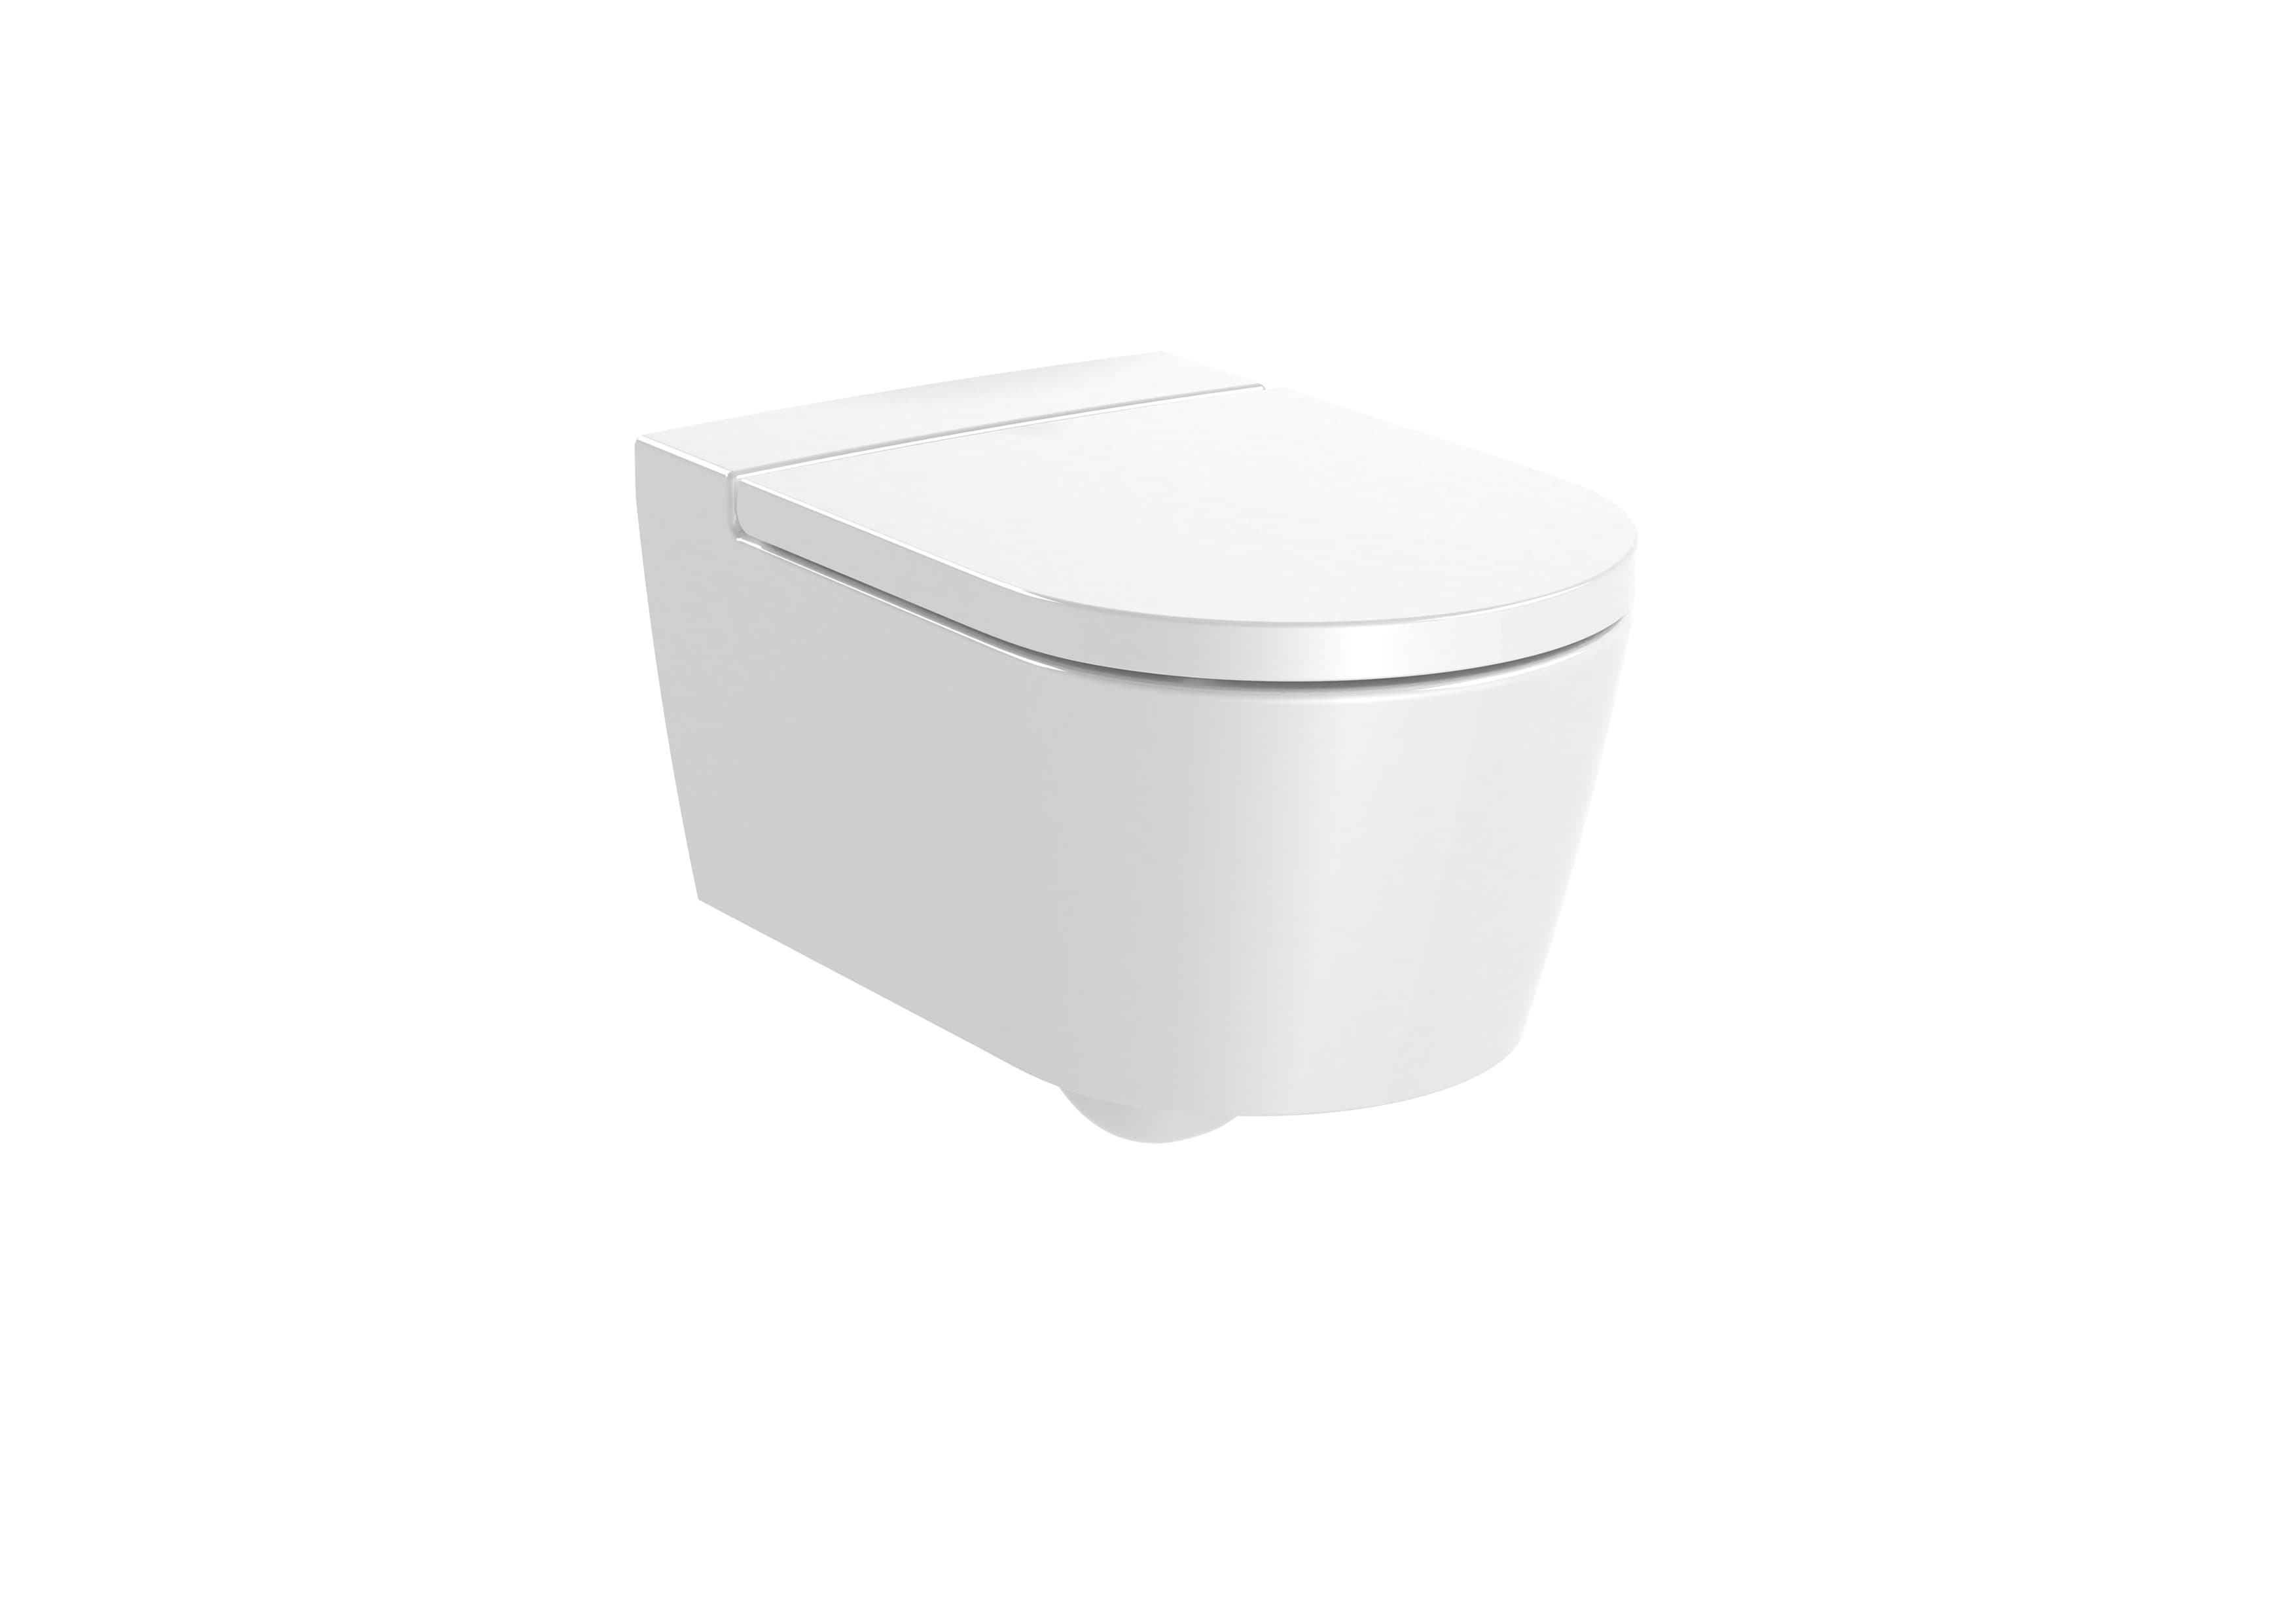 ROUND - Vitreous china Rimless wall-hung WC with horizontal outlet Roca A346527000